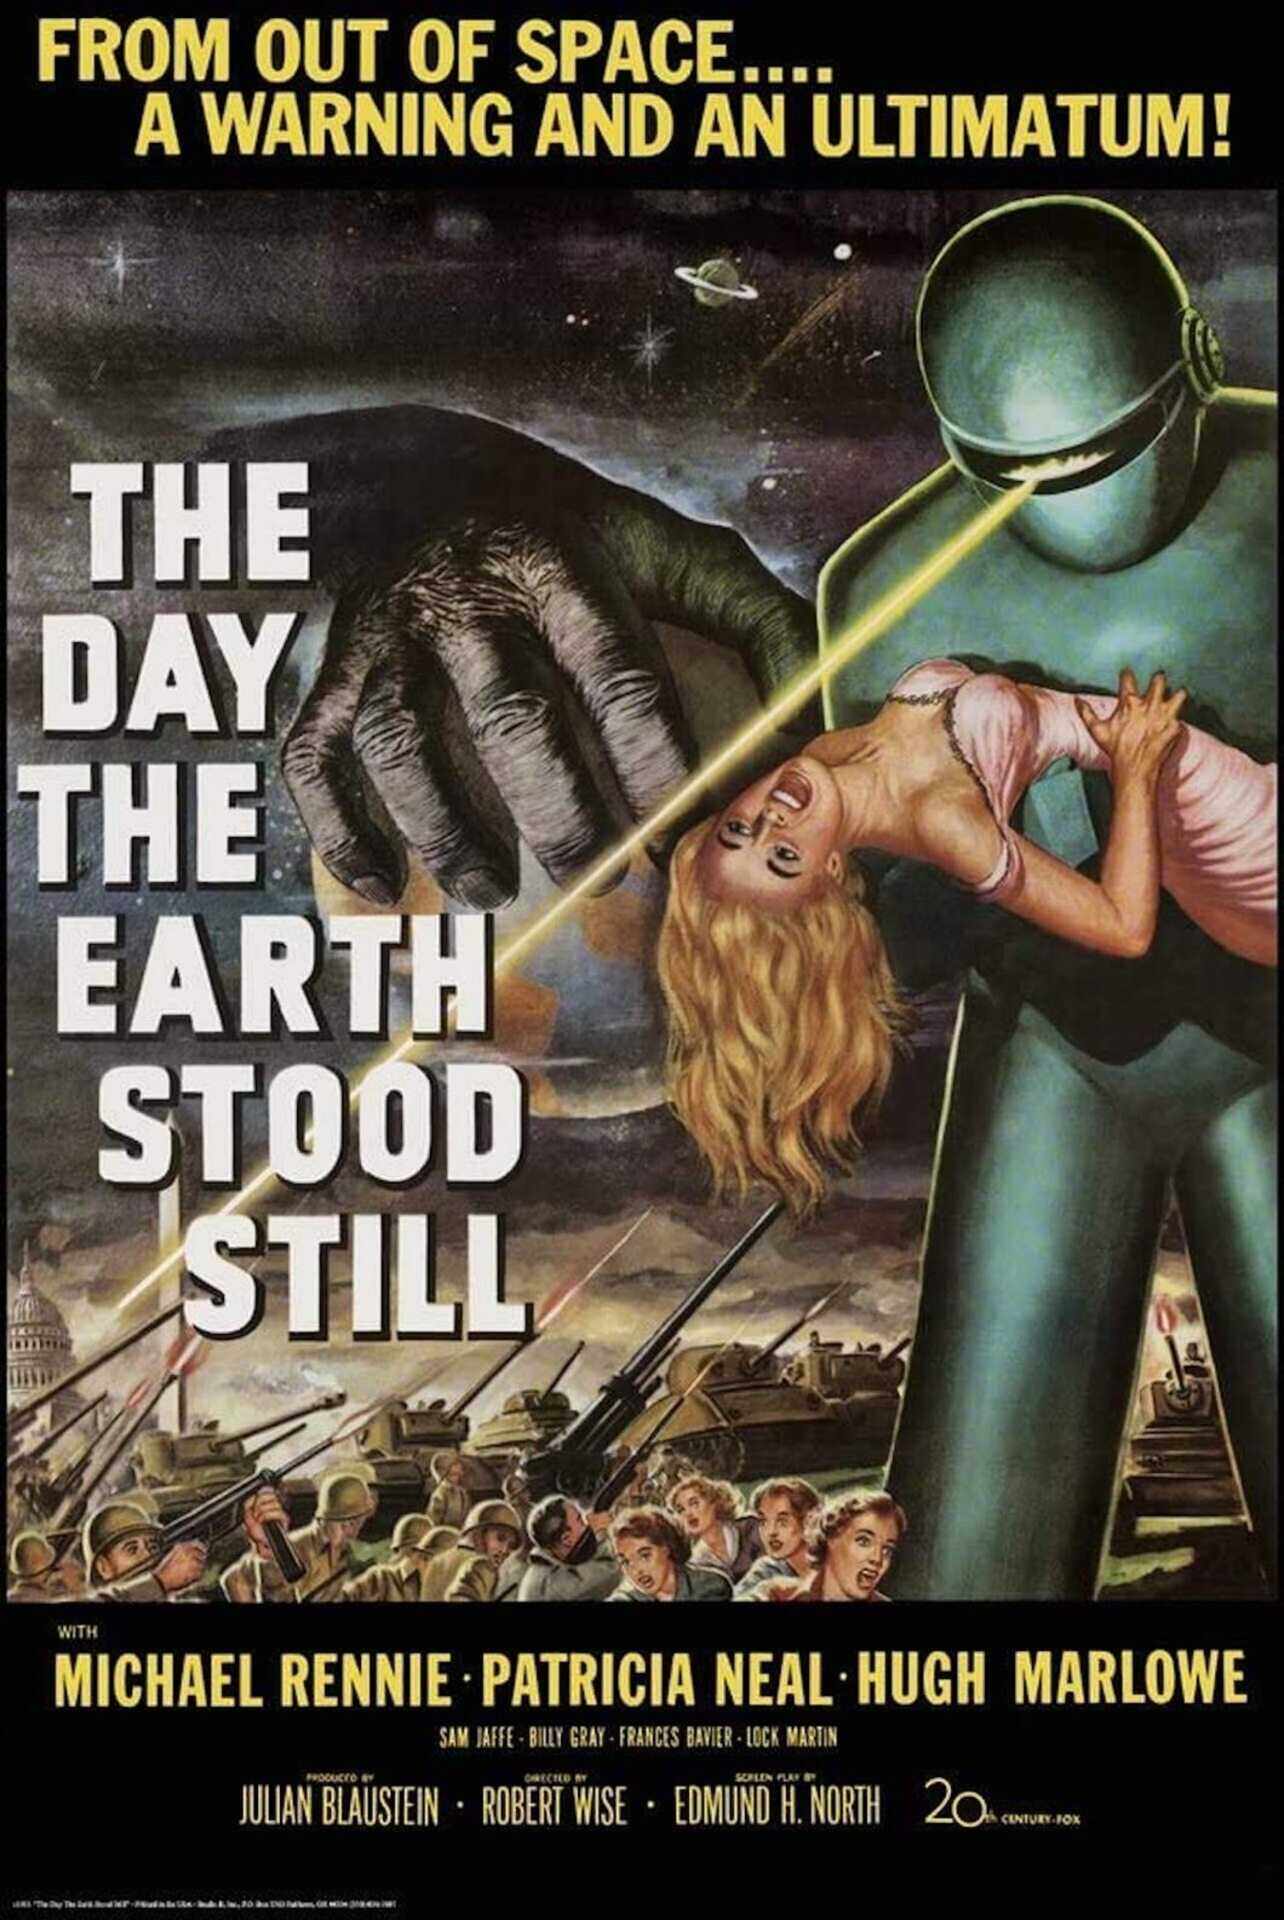 Theatrical poster for The Day The Earth Stood Still (1951).